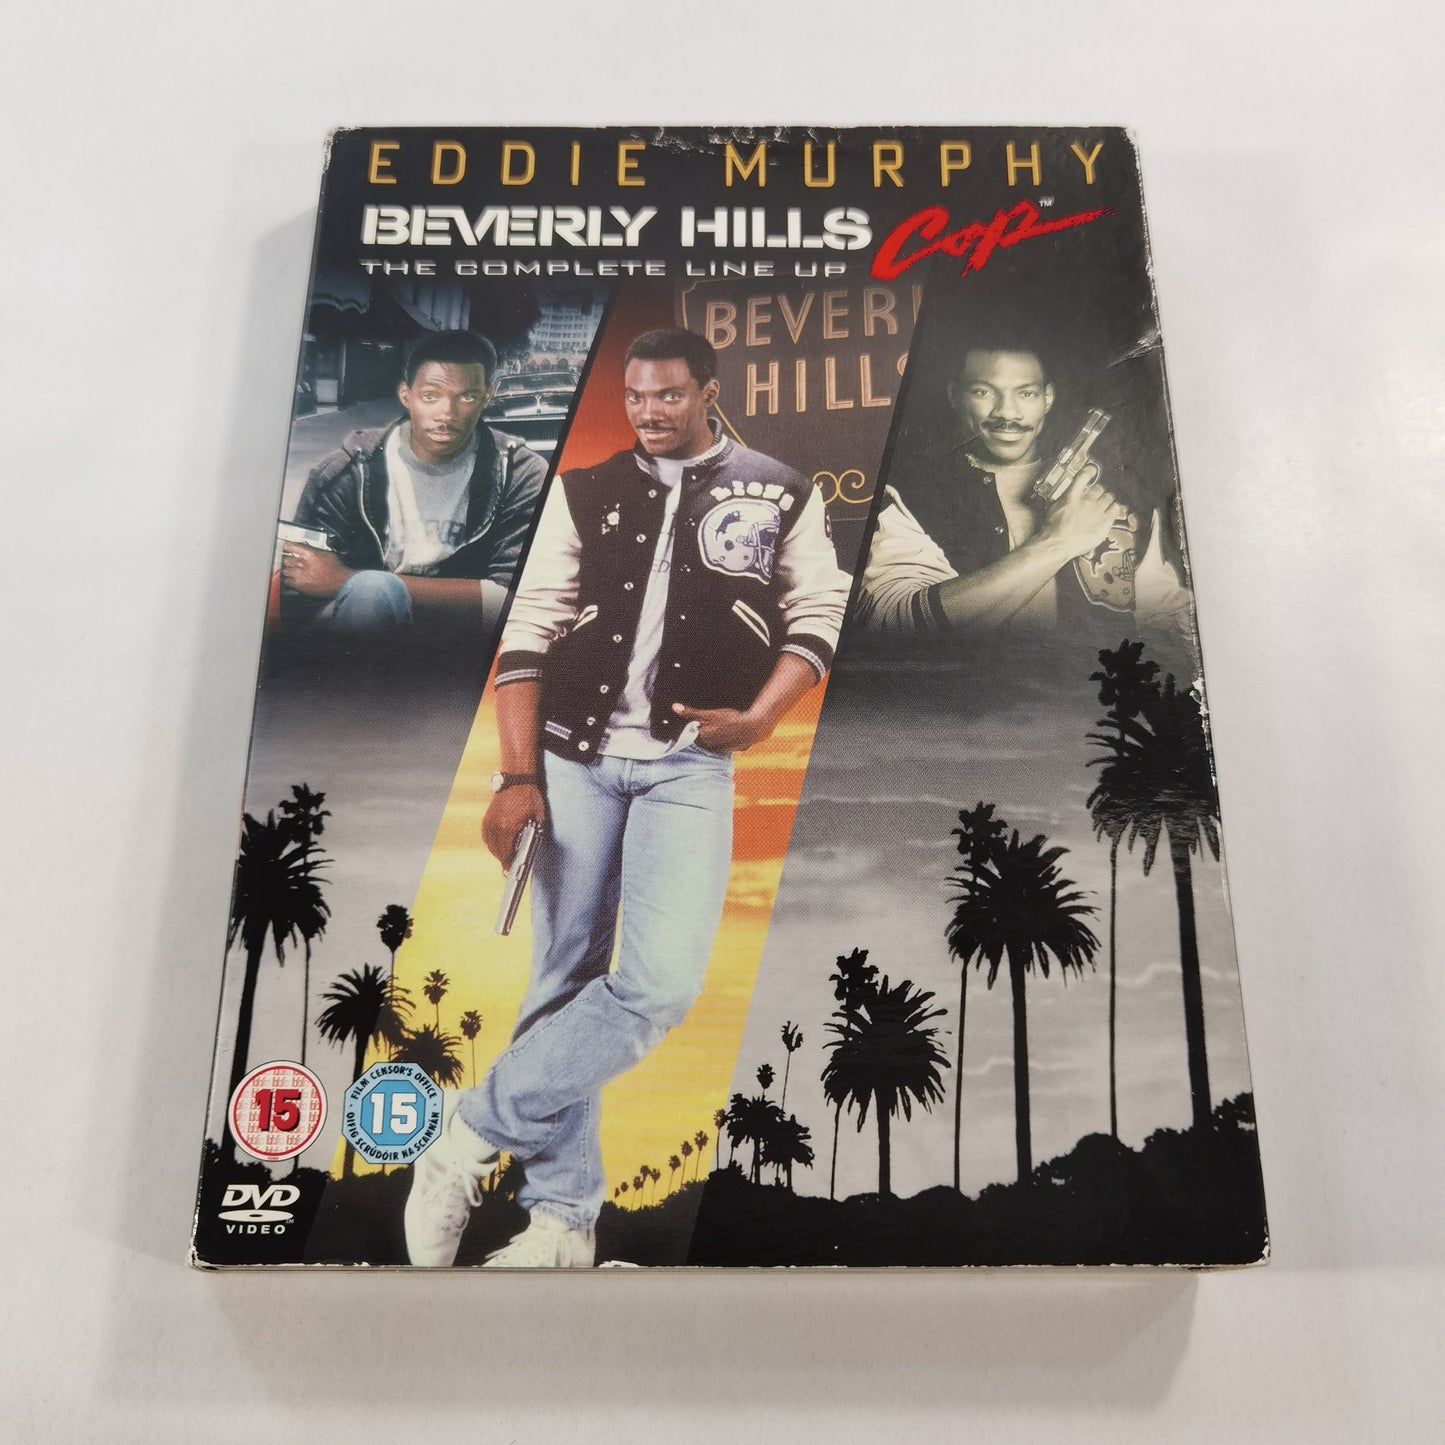 Beverly Hills Cop: The Complete Line Up - DVD UK 2005